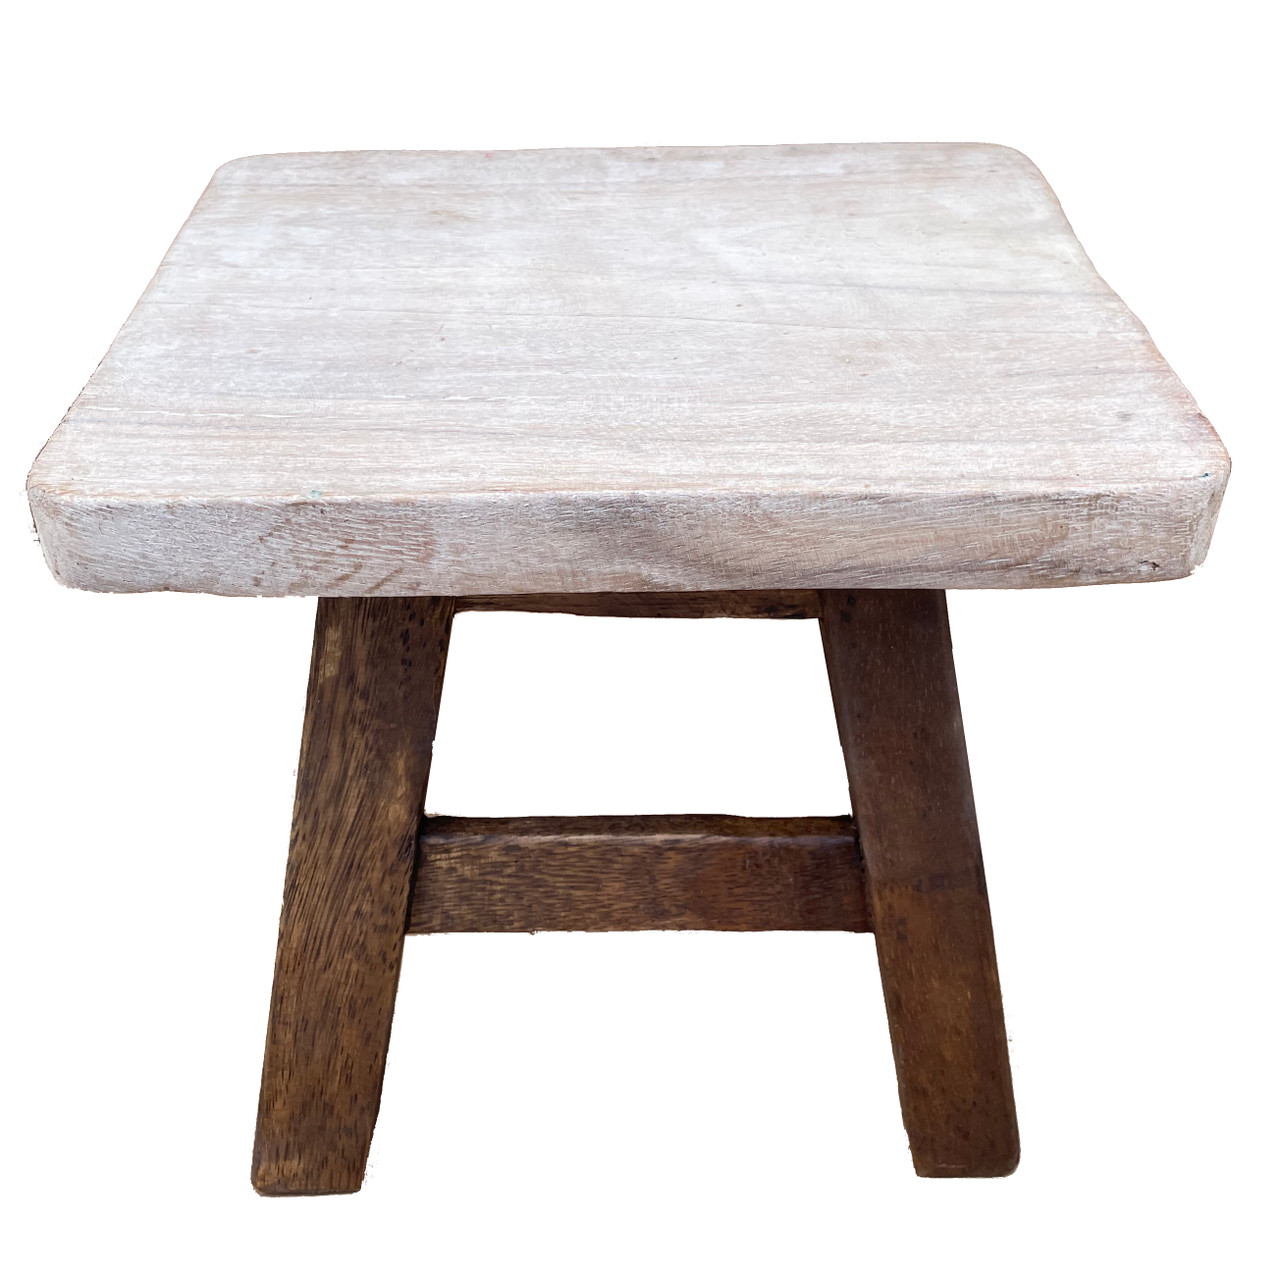 Whittlewud Wooden Kids Step Stool, (13.2 in x 14.4 in x 15.6) in